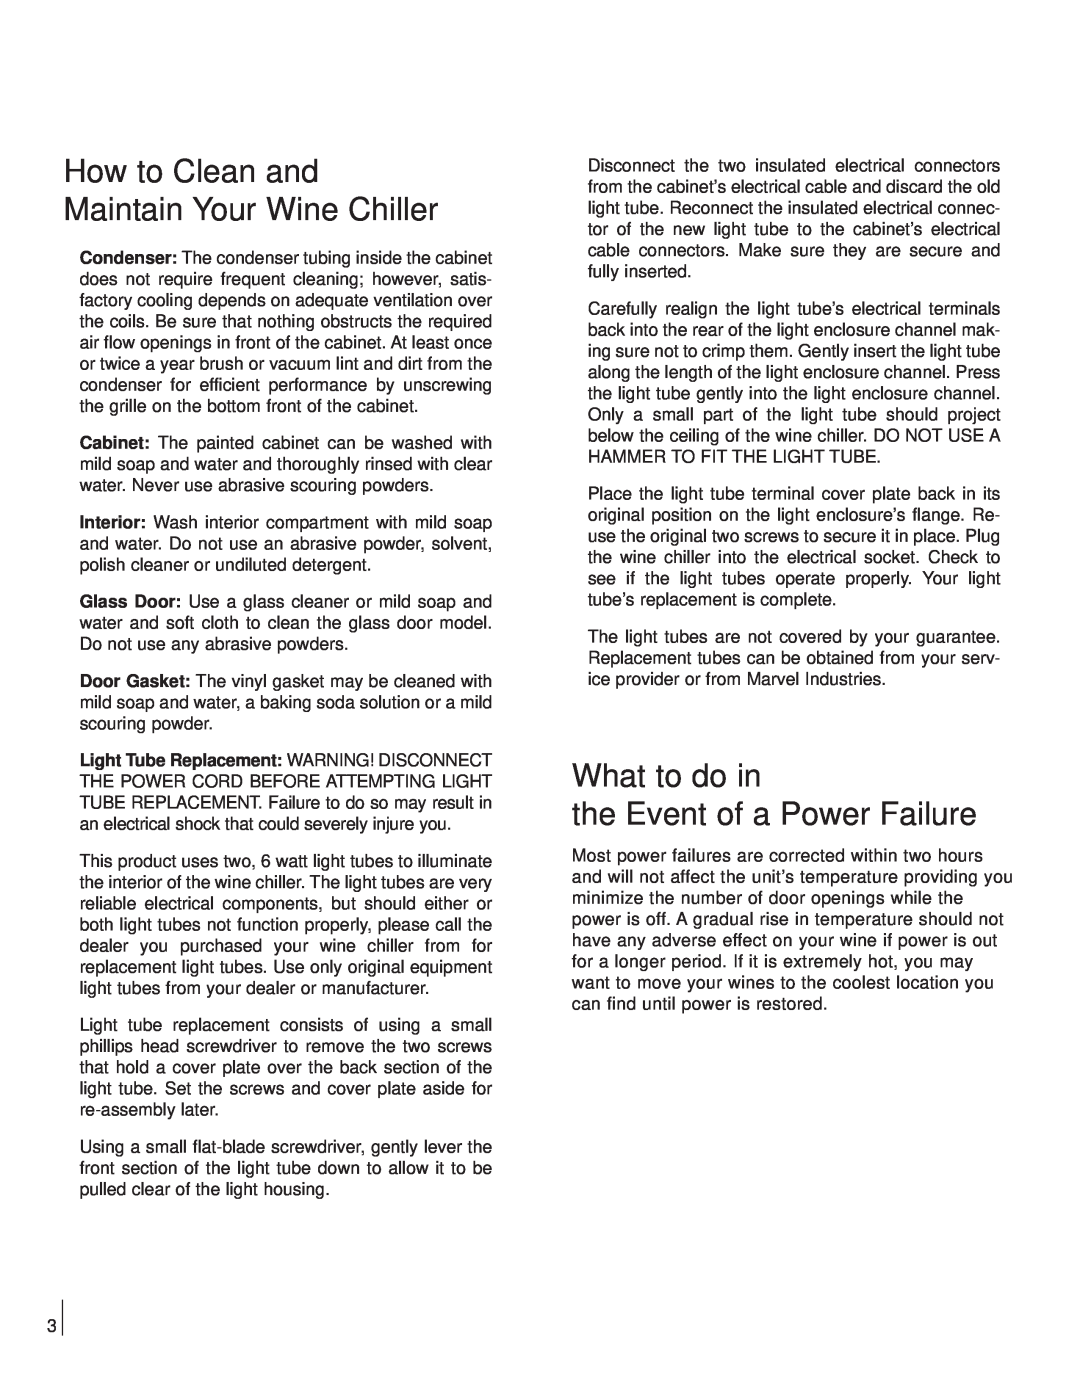 Marvel Industries Refrigerated Wine Chiller manual How to Clean and Maintain Your Wine Chiller 